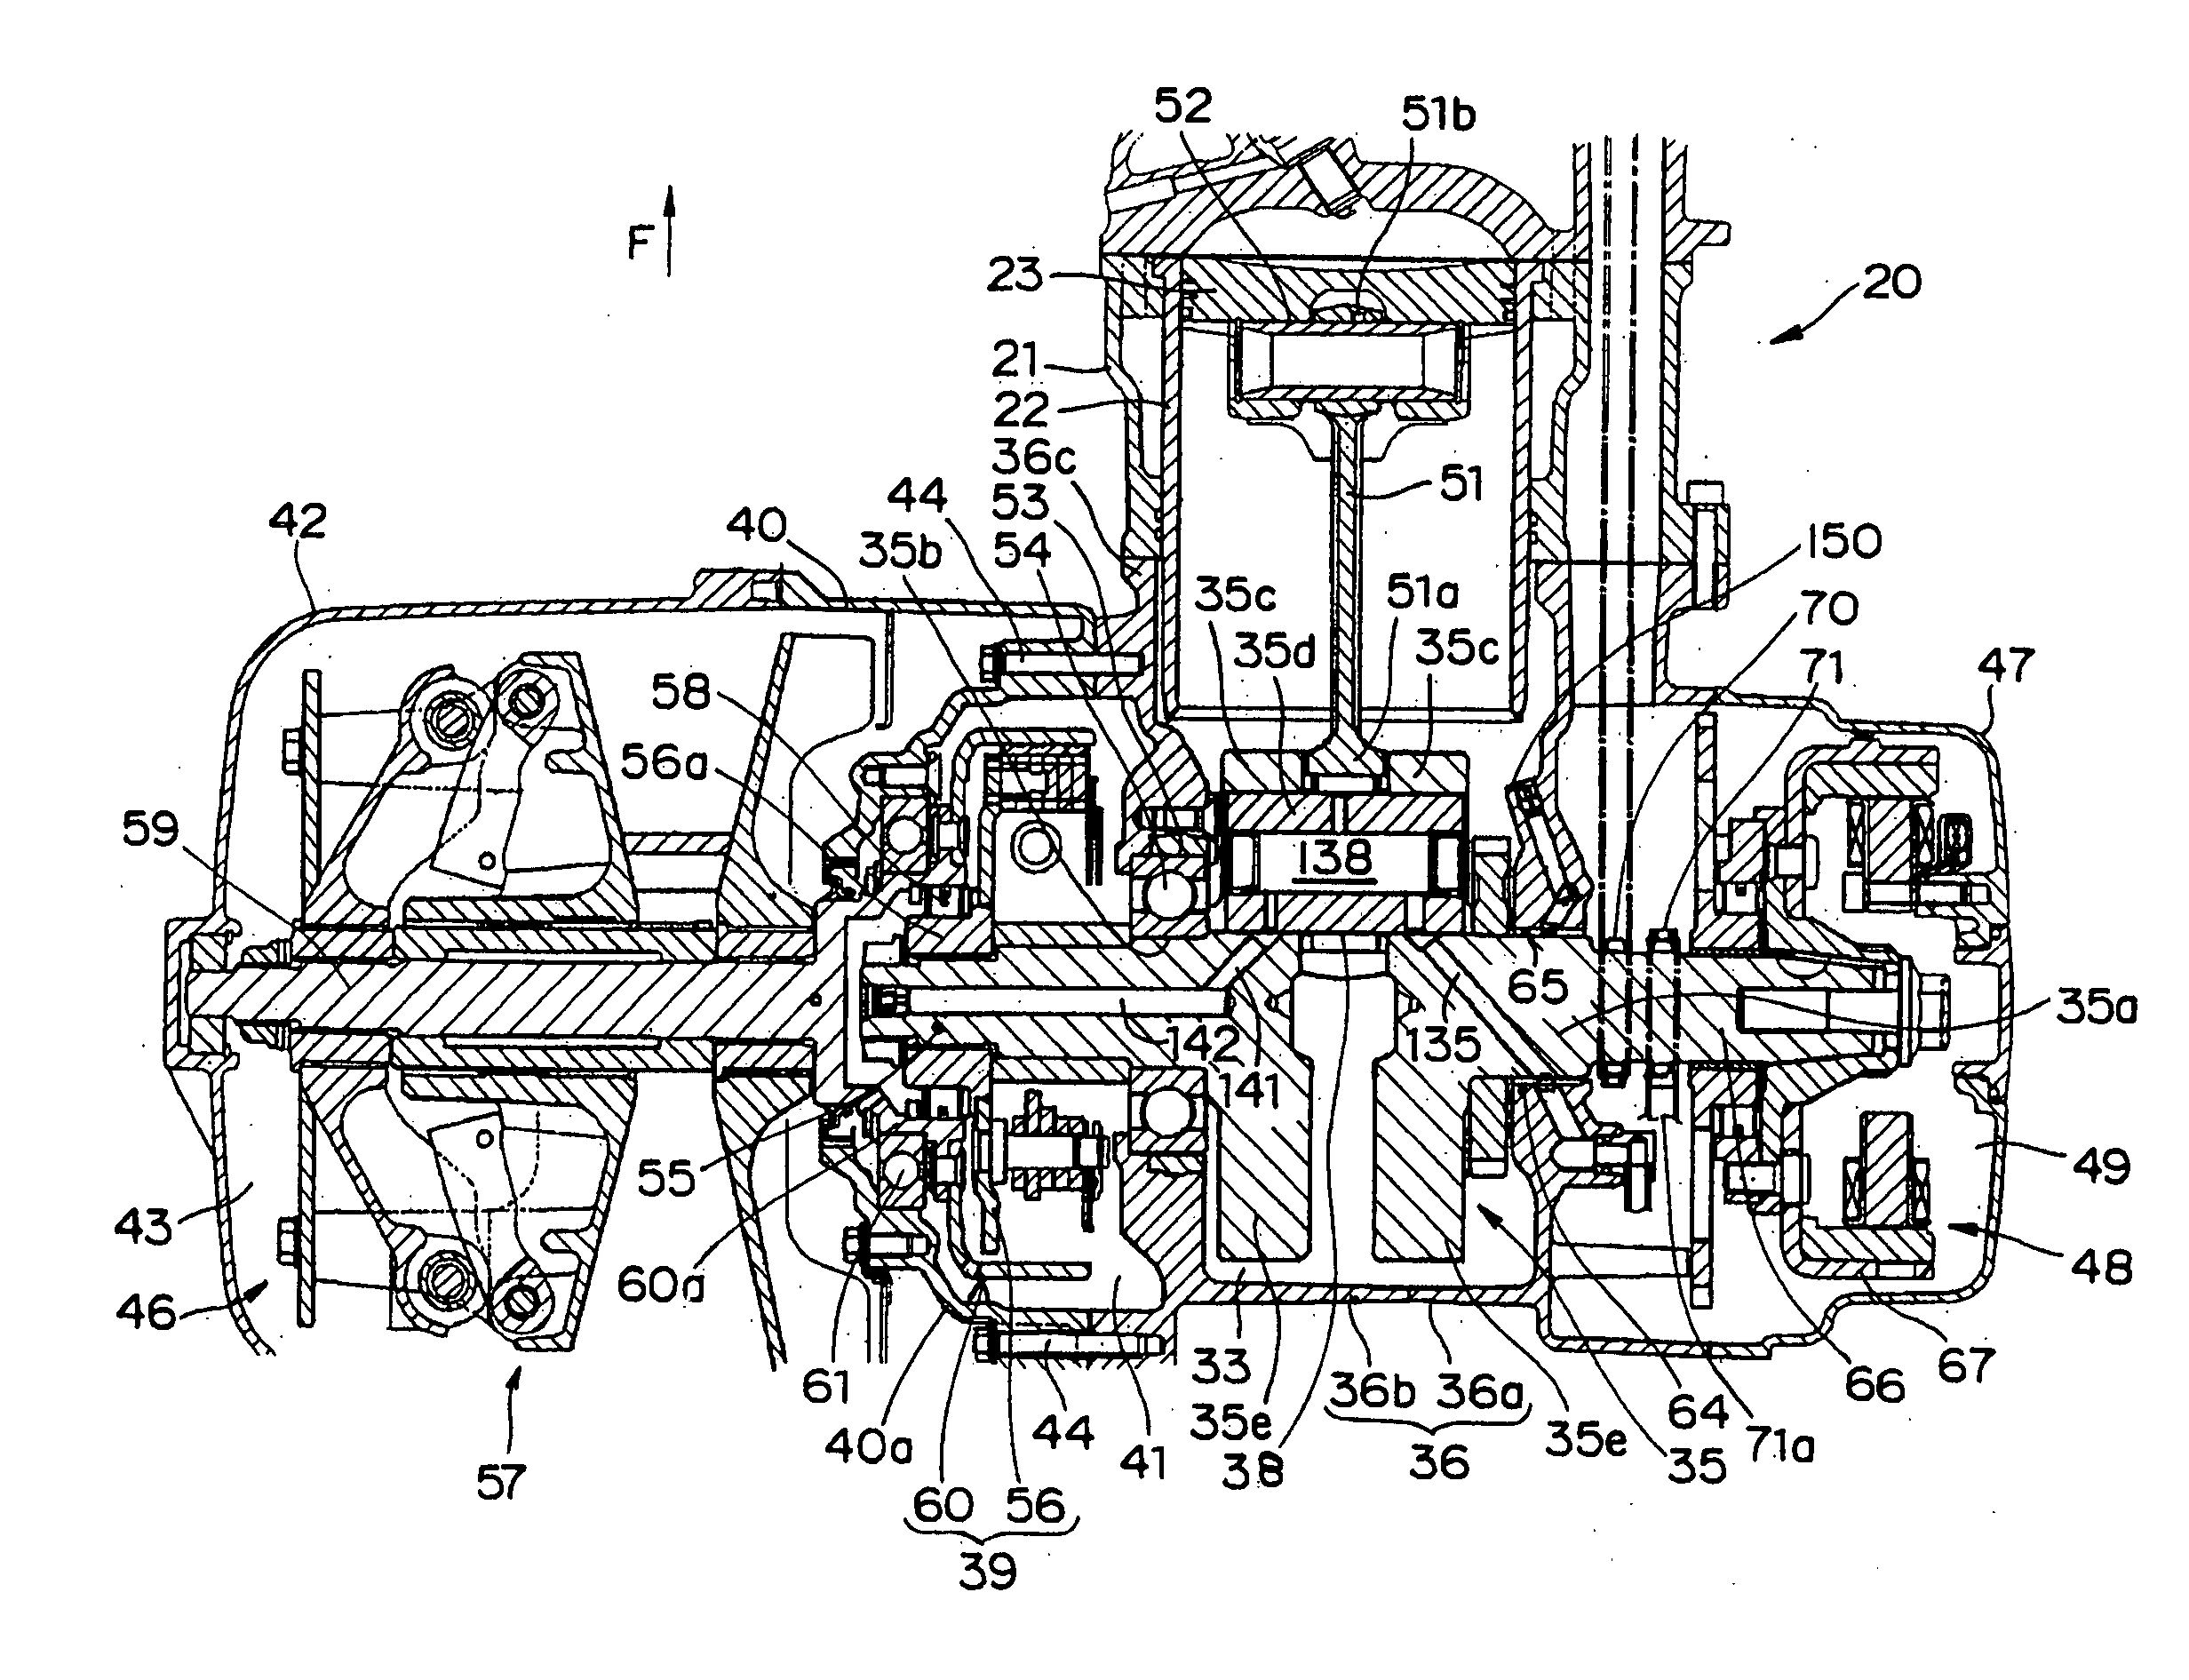 Engine with centrifugal clutch